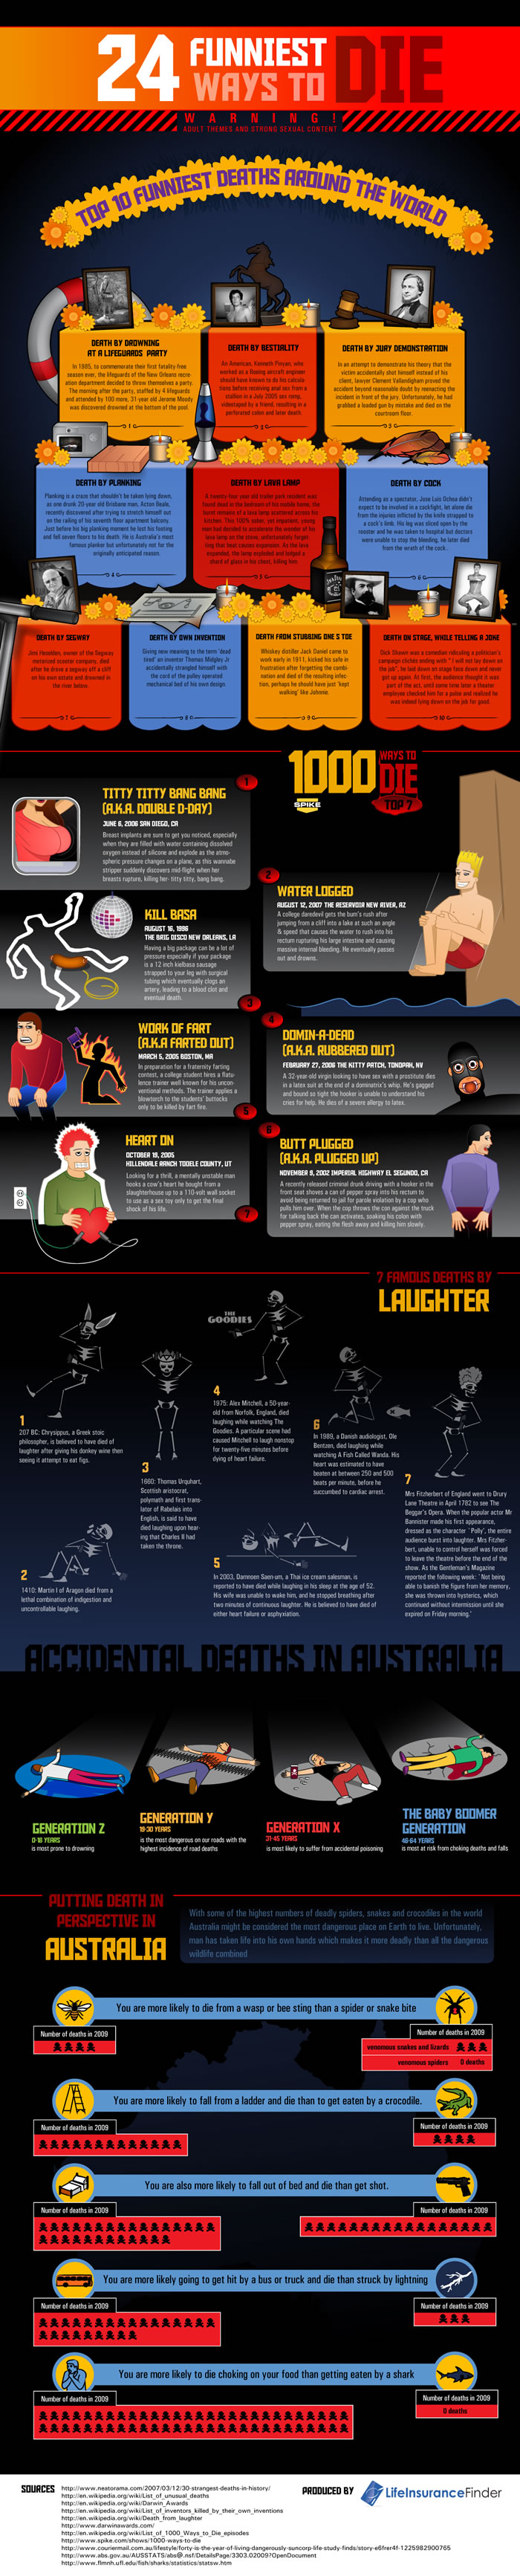 Some Funny Ways to Die